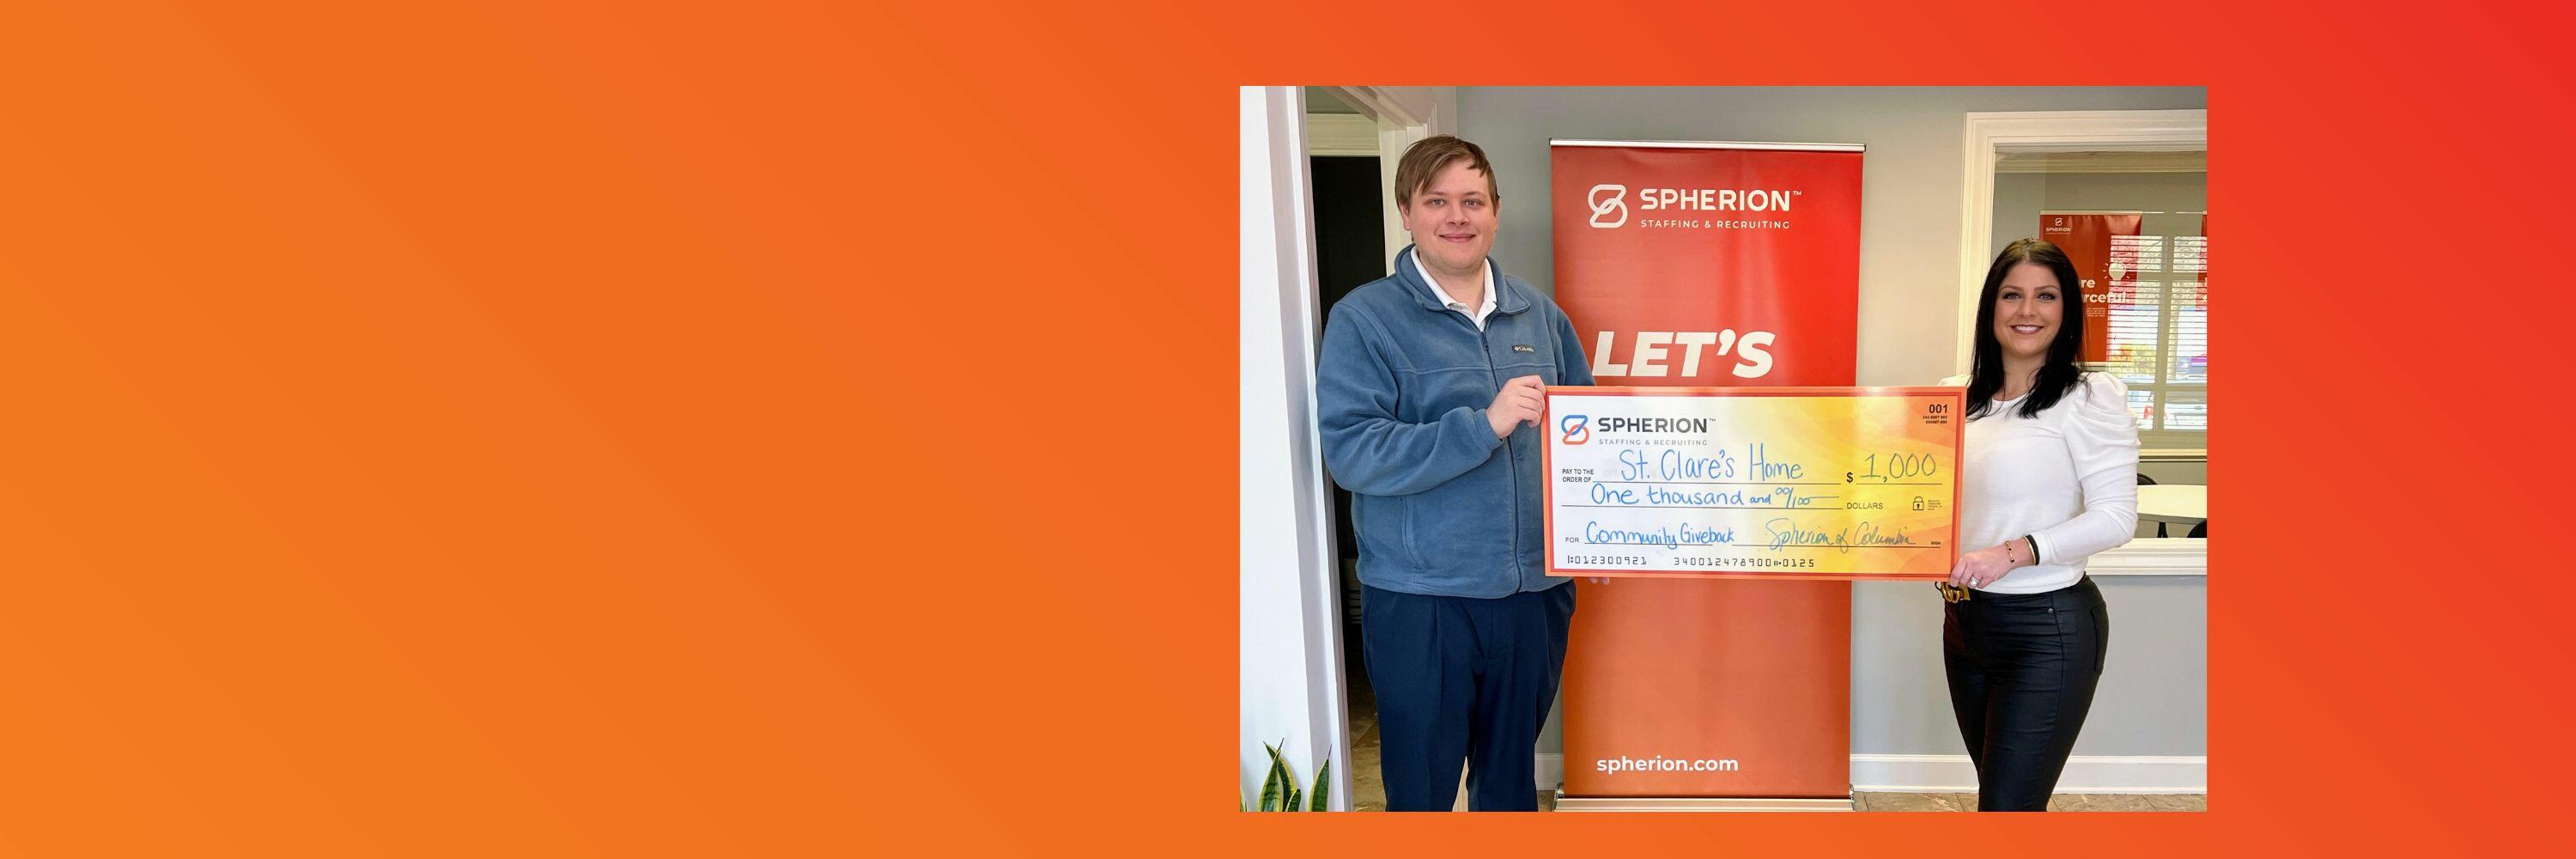 Orange background with a photo of two people holding a giant check for $1,000 on the right side